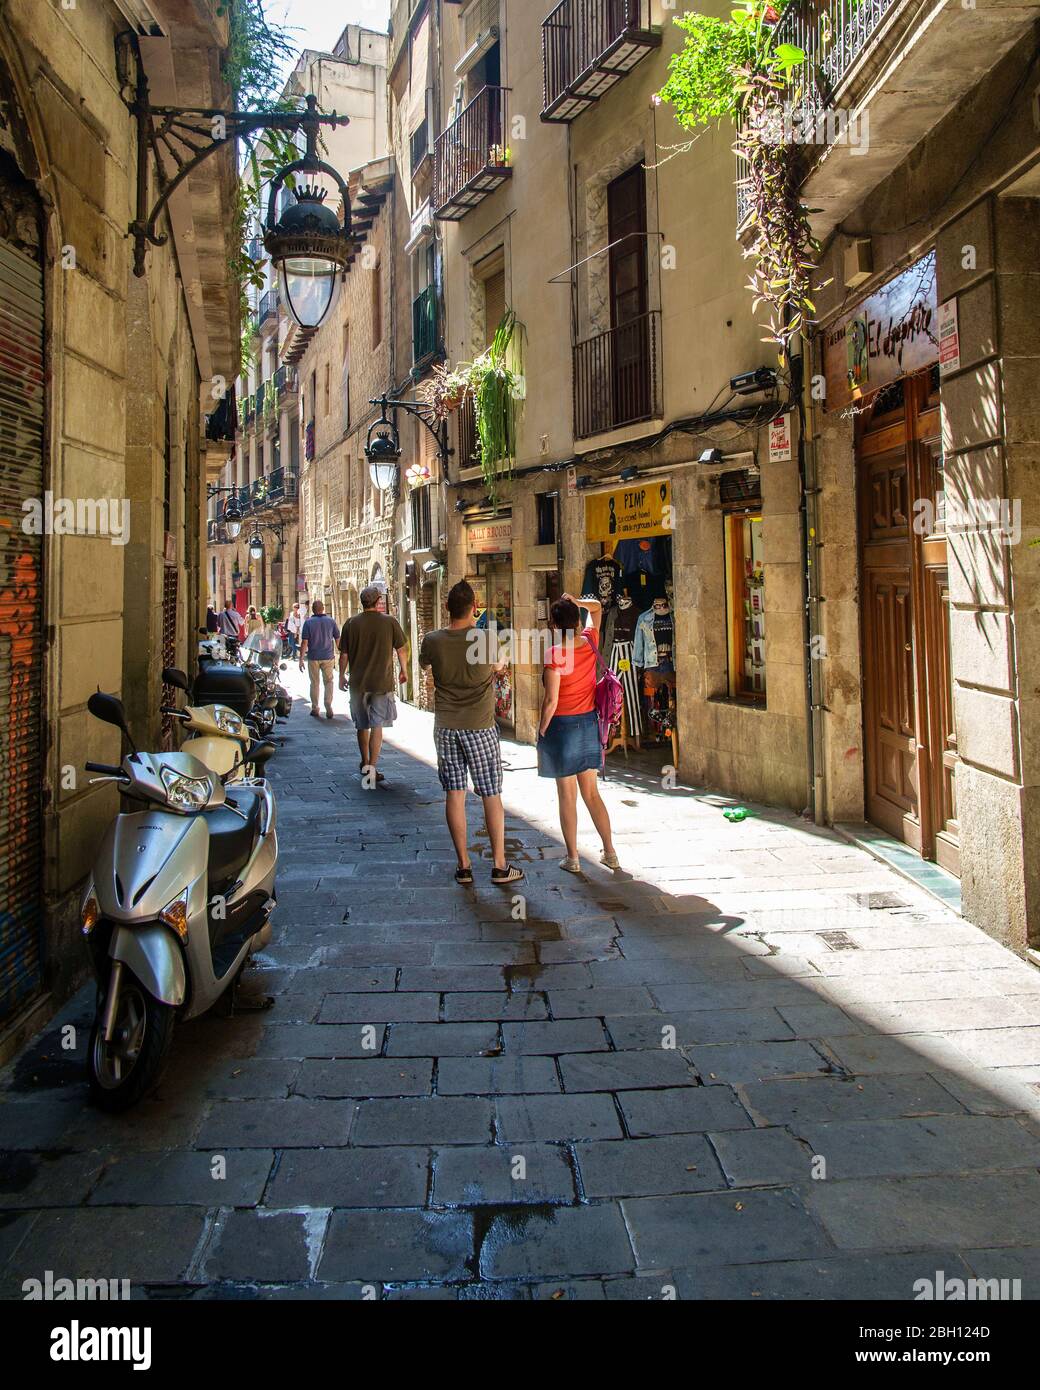 Typical side street just off La Rambla in central Barcelona, Spain. Stock Photo